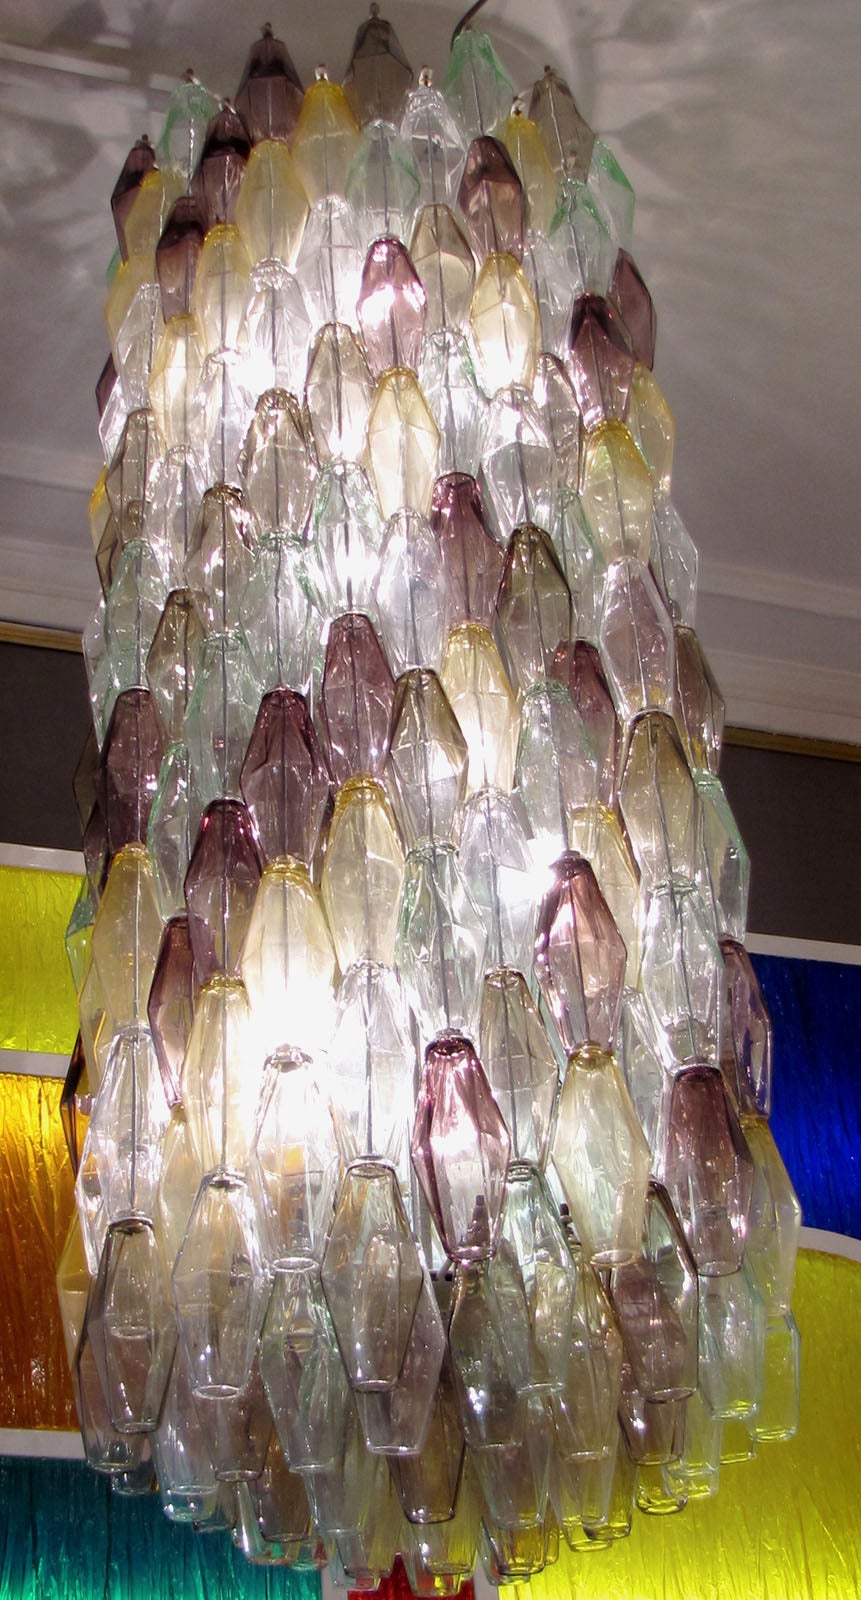 Important large polyhedral Chandelier by Venini in five colors; amethyst, yellow, clear, green and smoked grey.